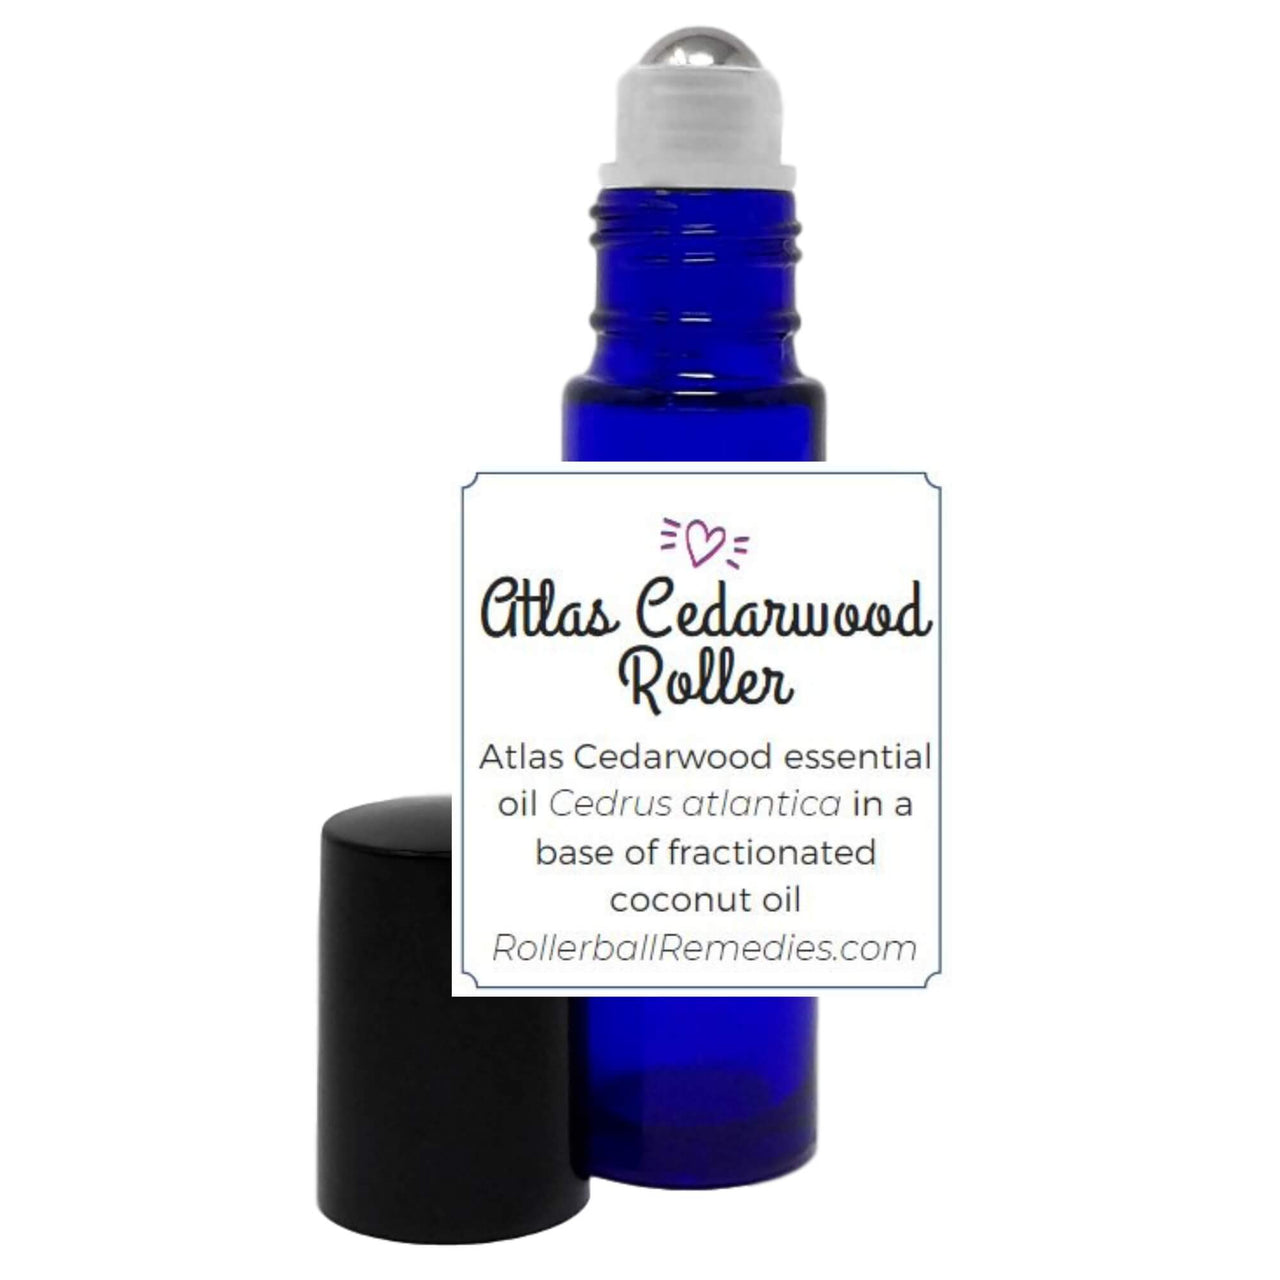 Atlas Cedarwood Essential Oil Roller Blend Review Key Features and Functionality